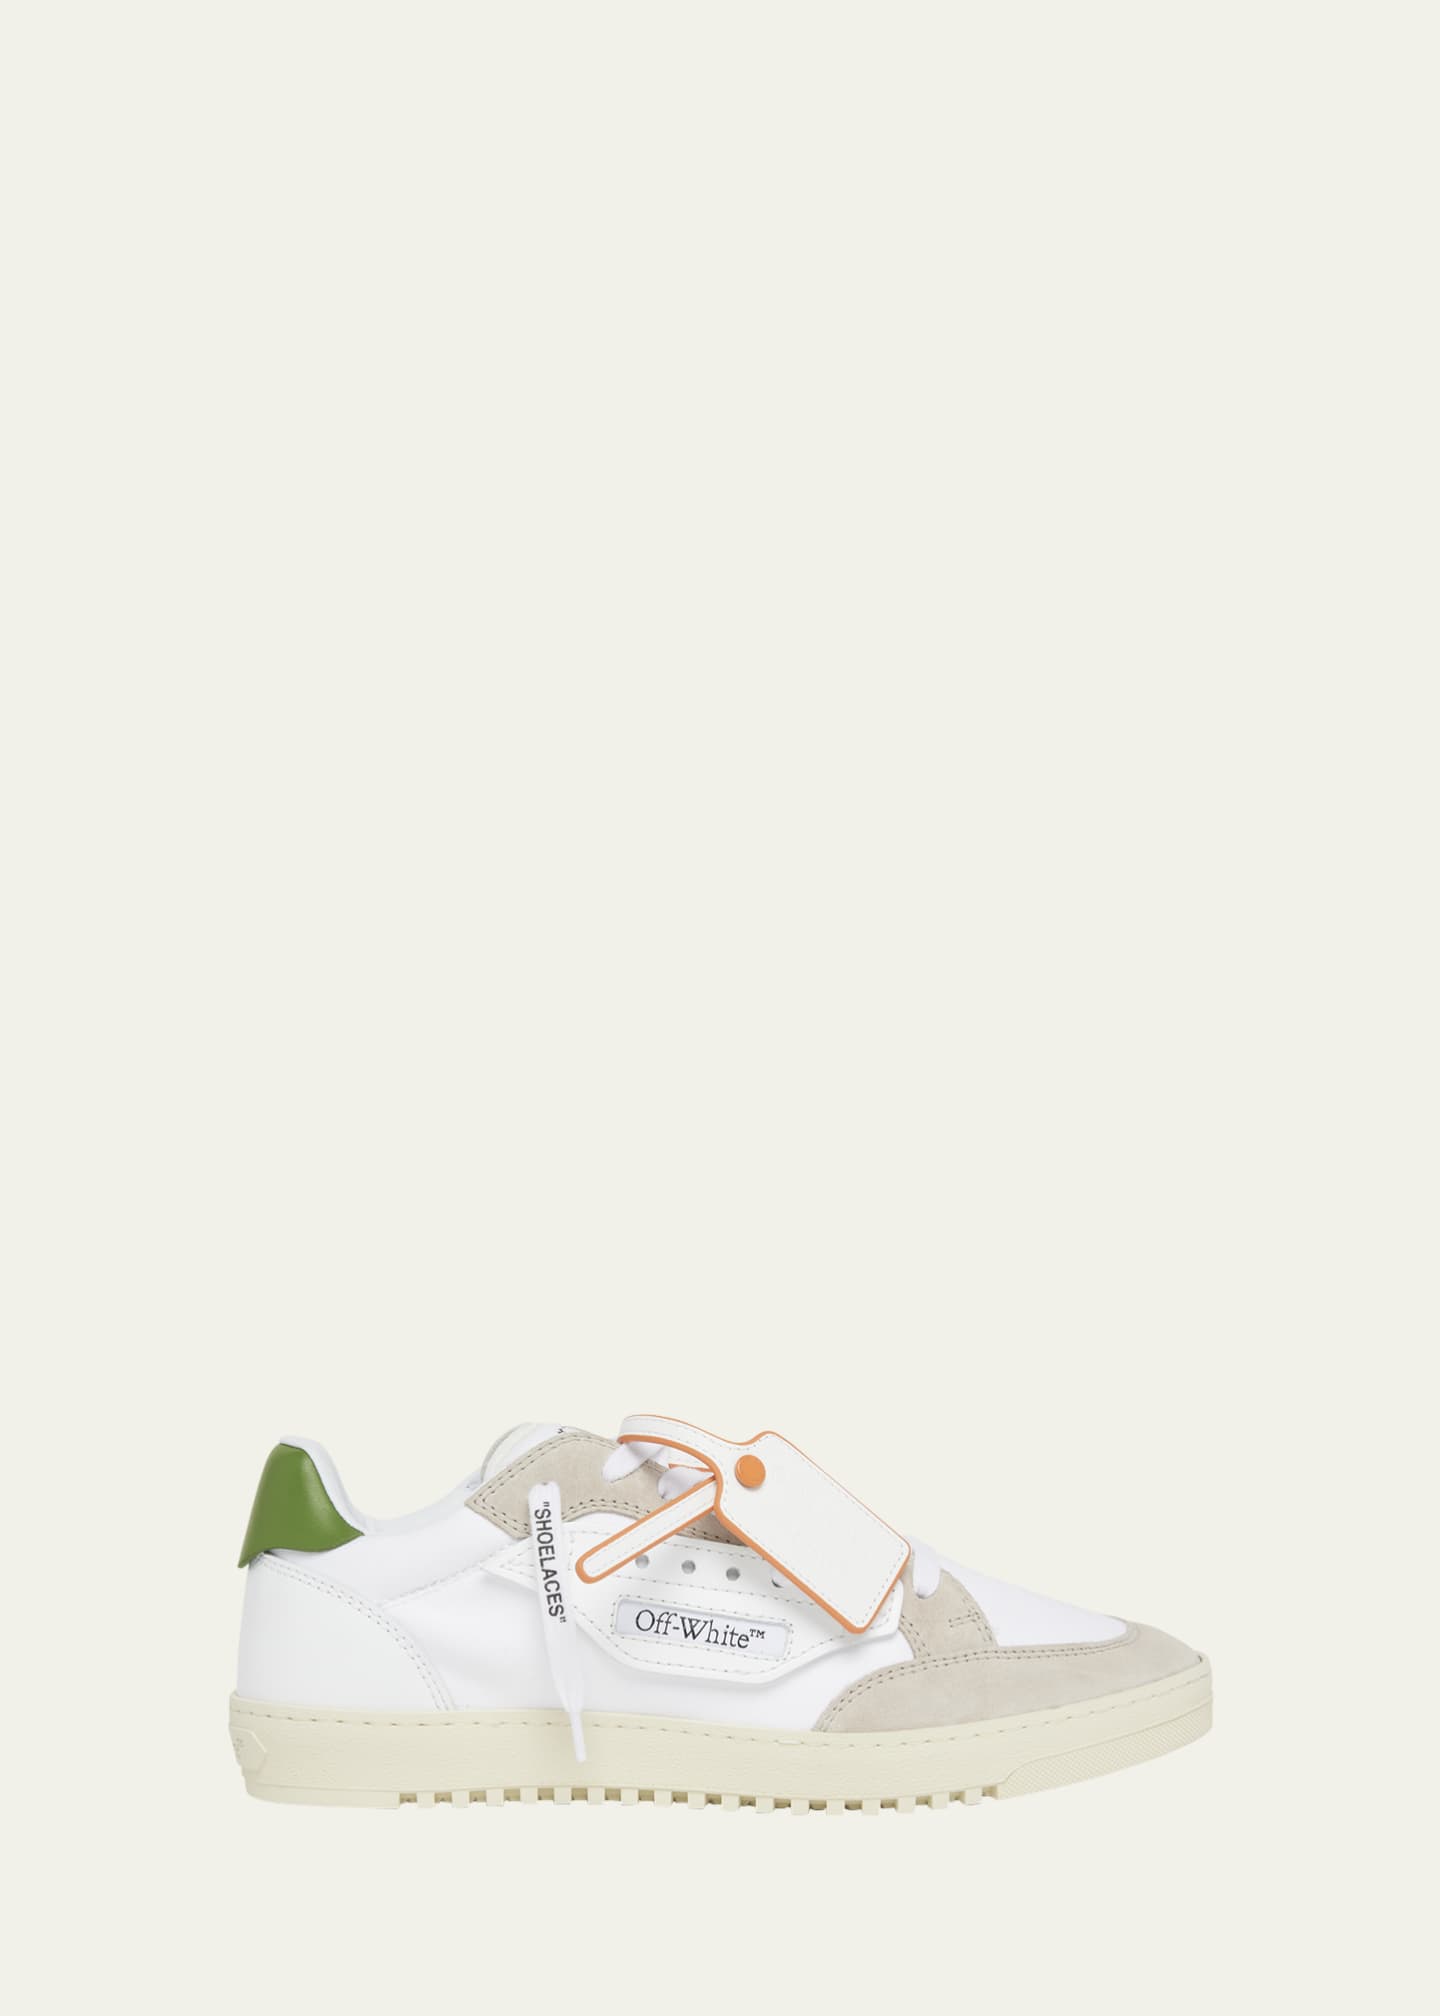 Off-White Men's 5.0 Canvas and Leather Low-Top Sneakers Image 1 of 5